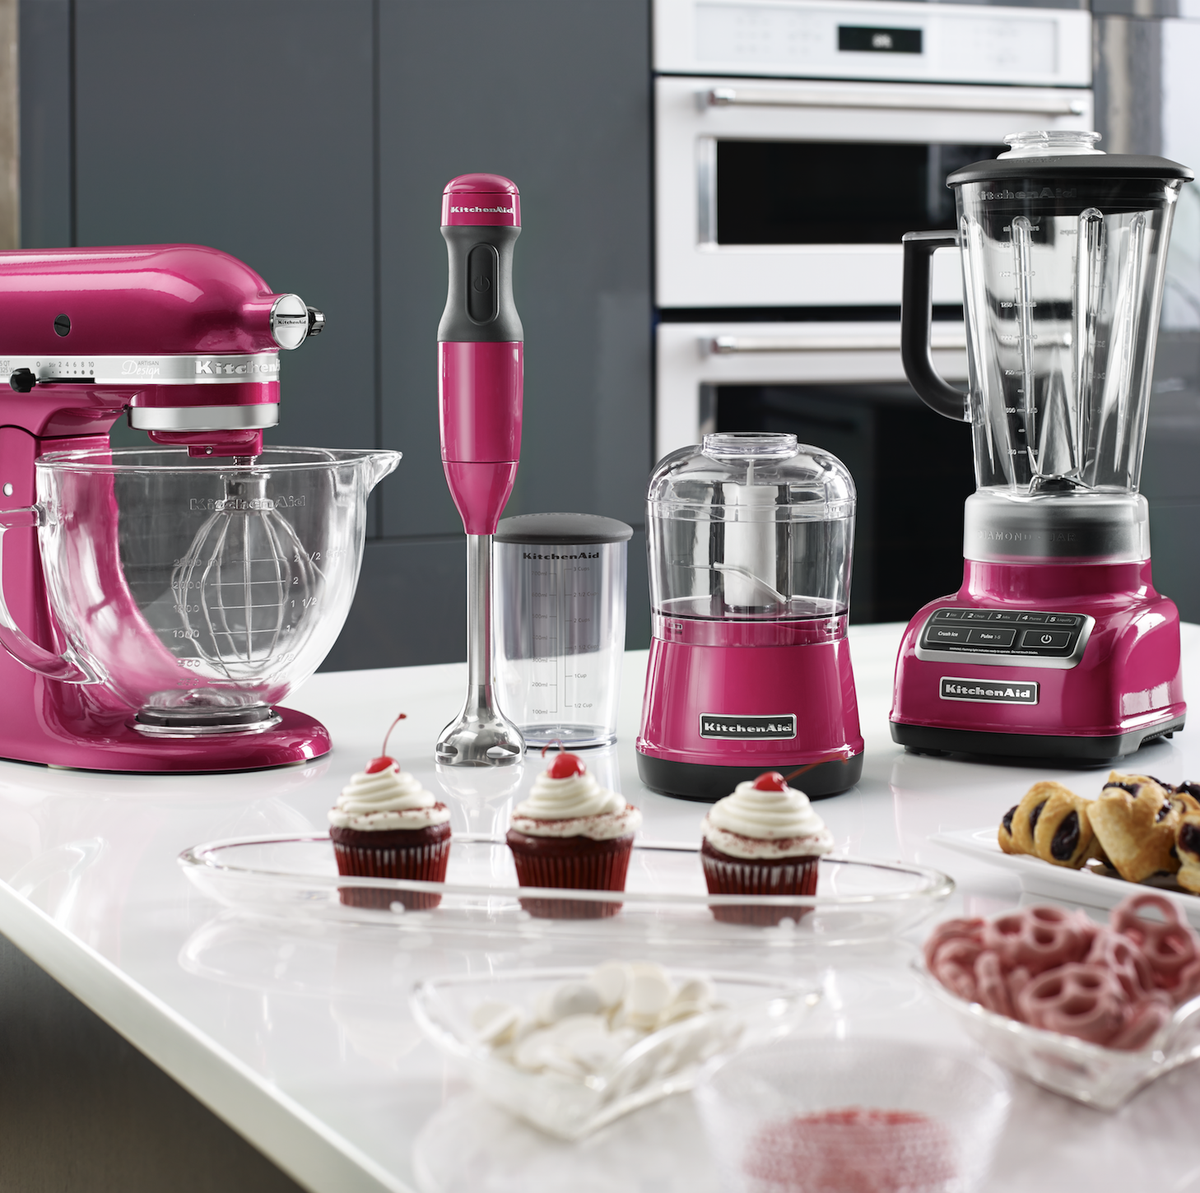 Is A $1000 Stand Mixer Really Worth It?